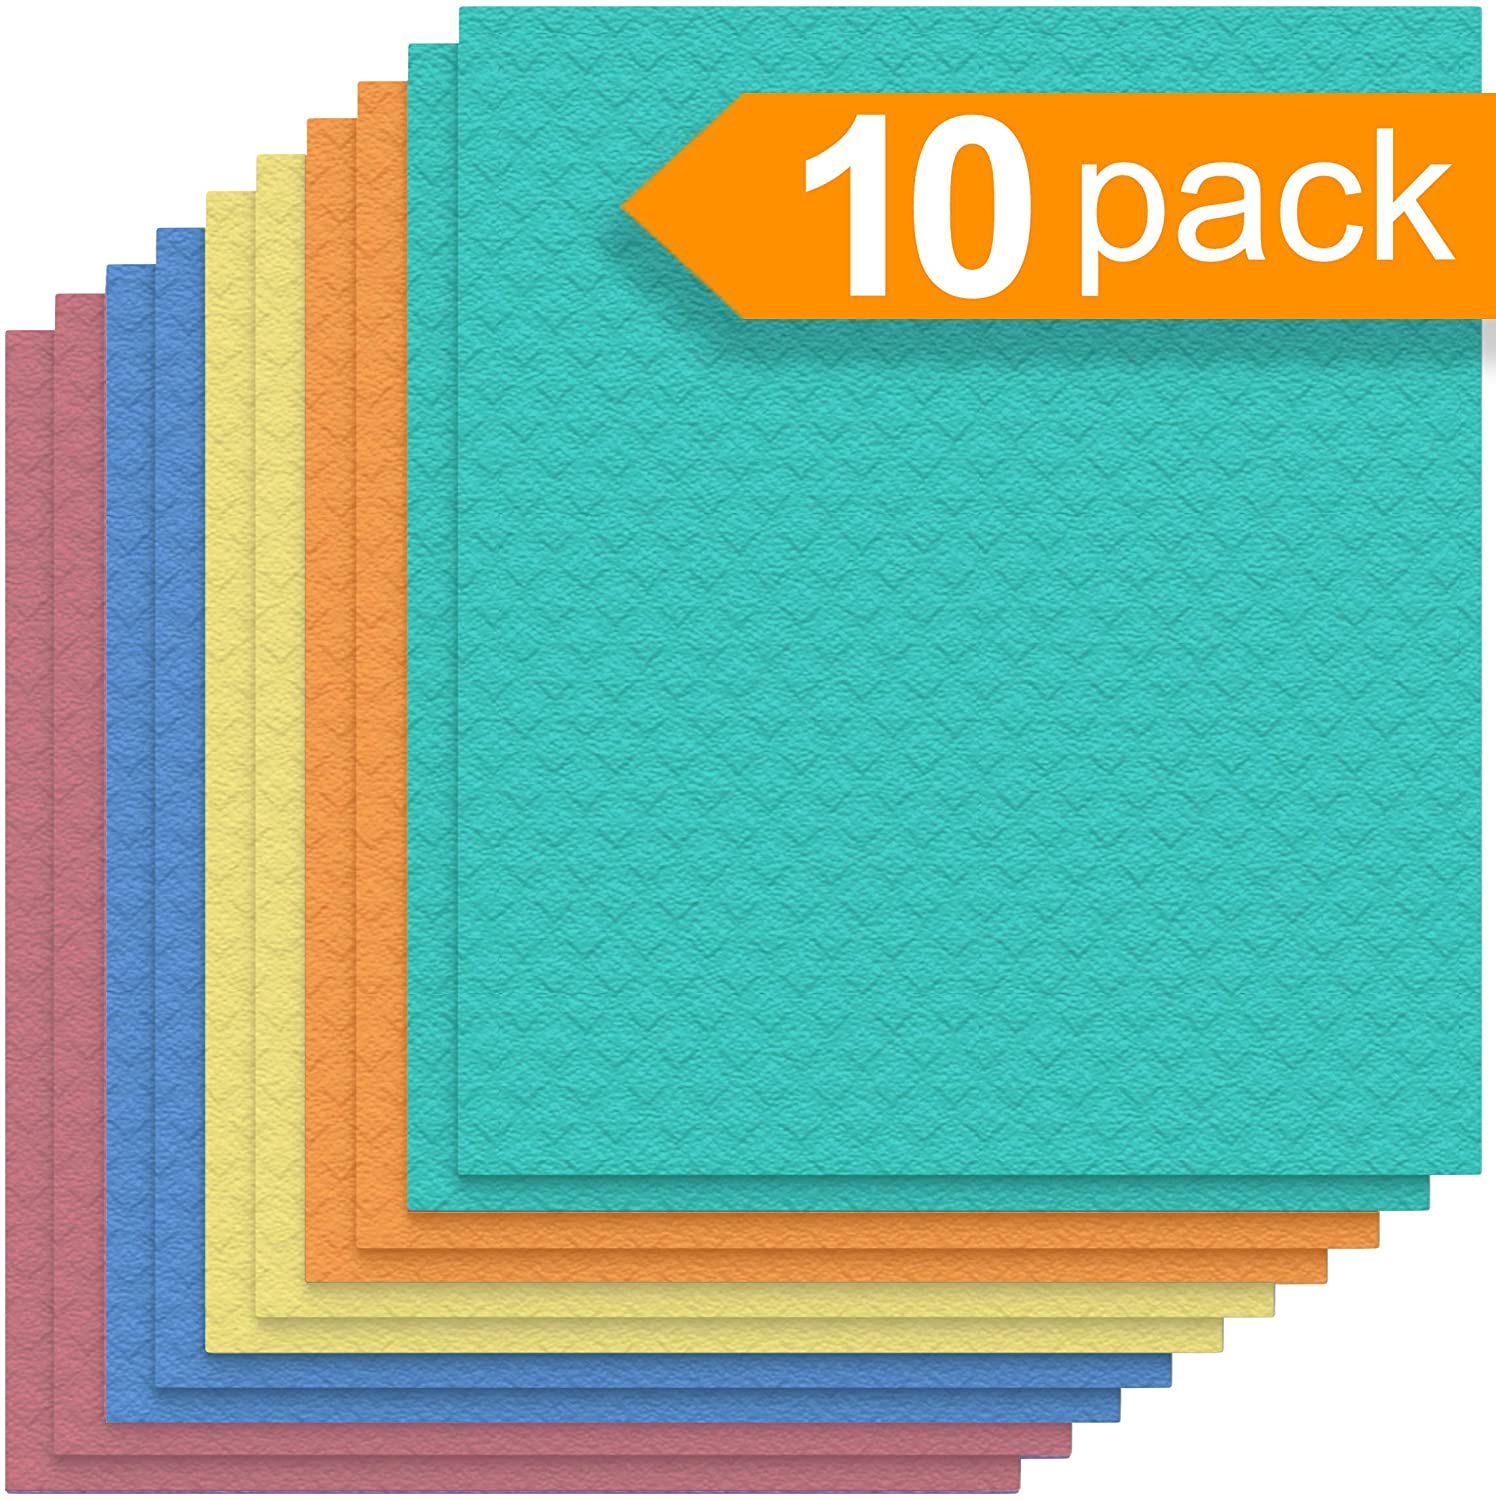 10Pack Cleaning Cloths, Washcloths Super Absorbent Kitchen Towels